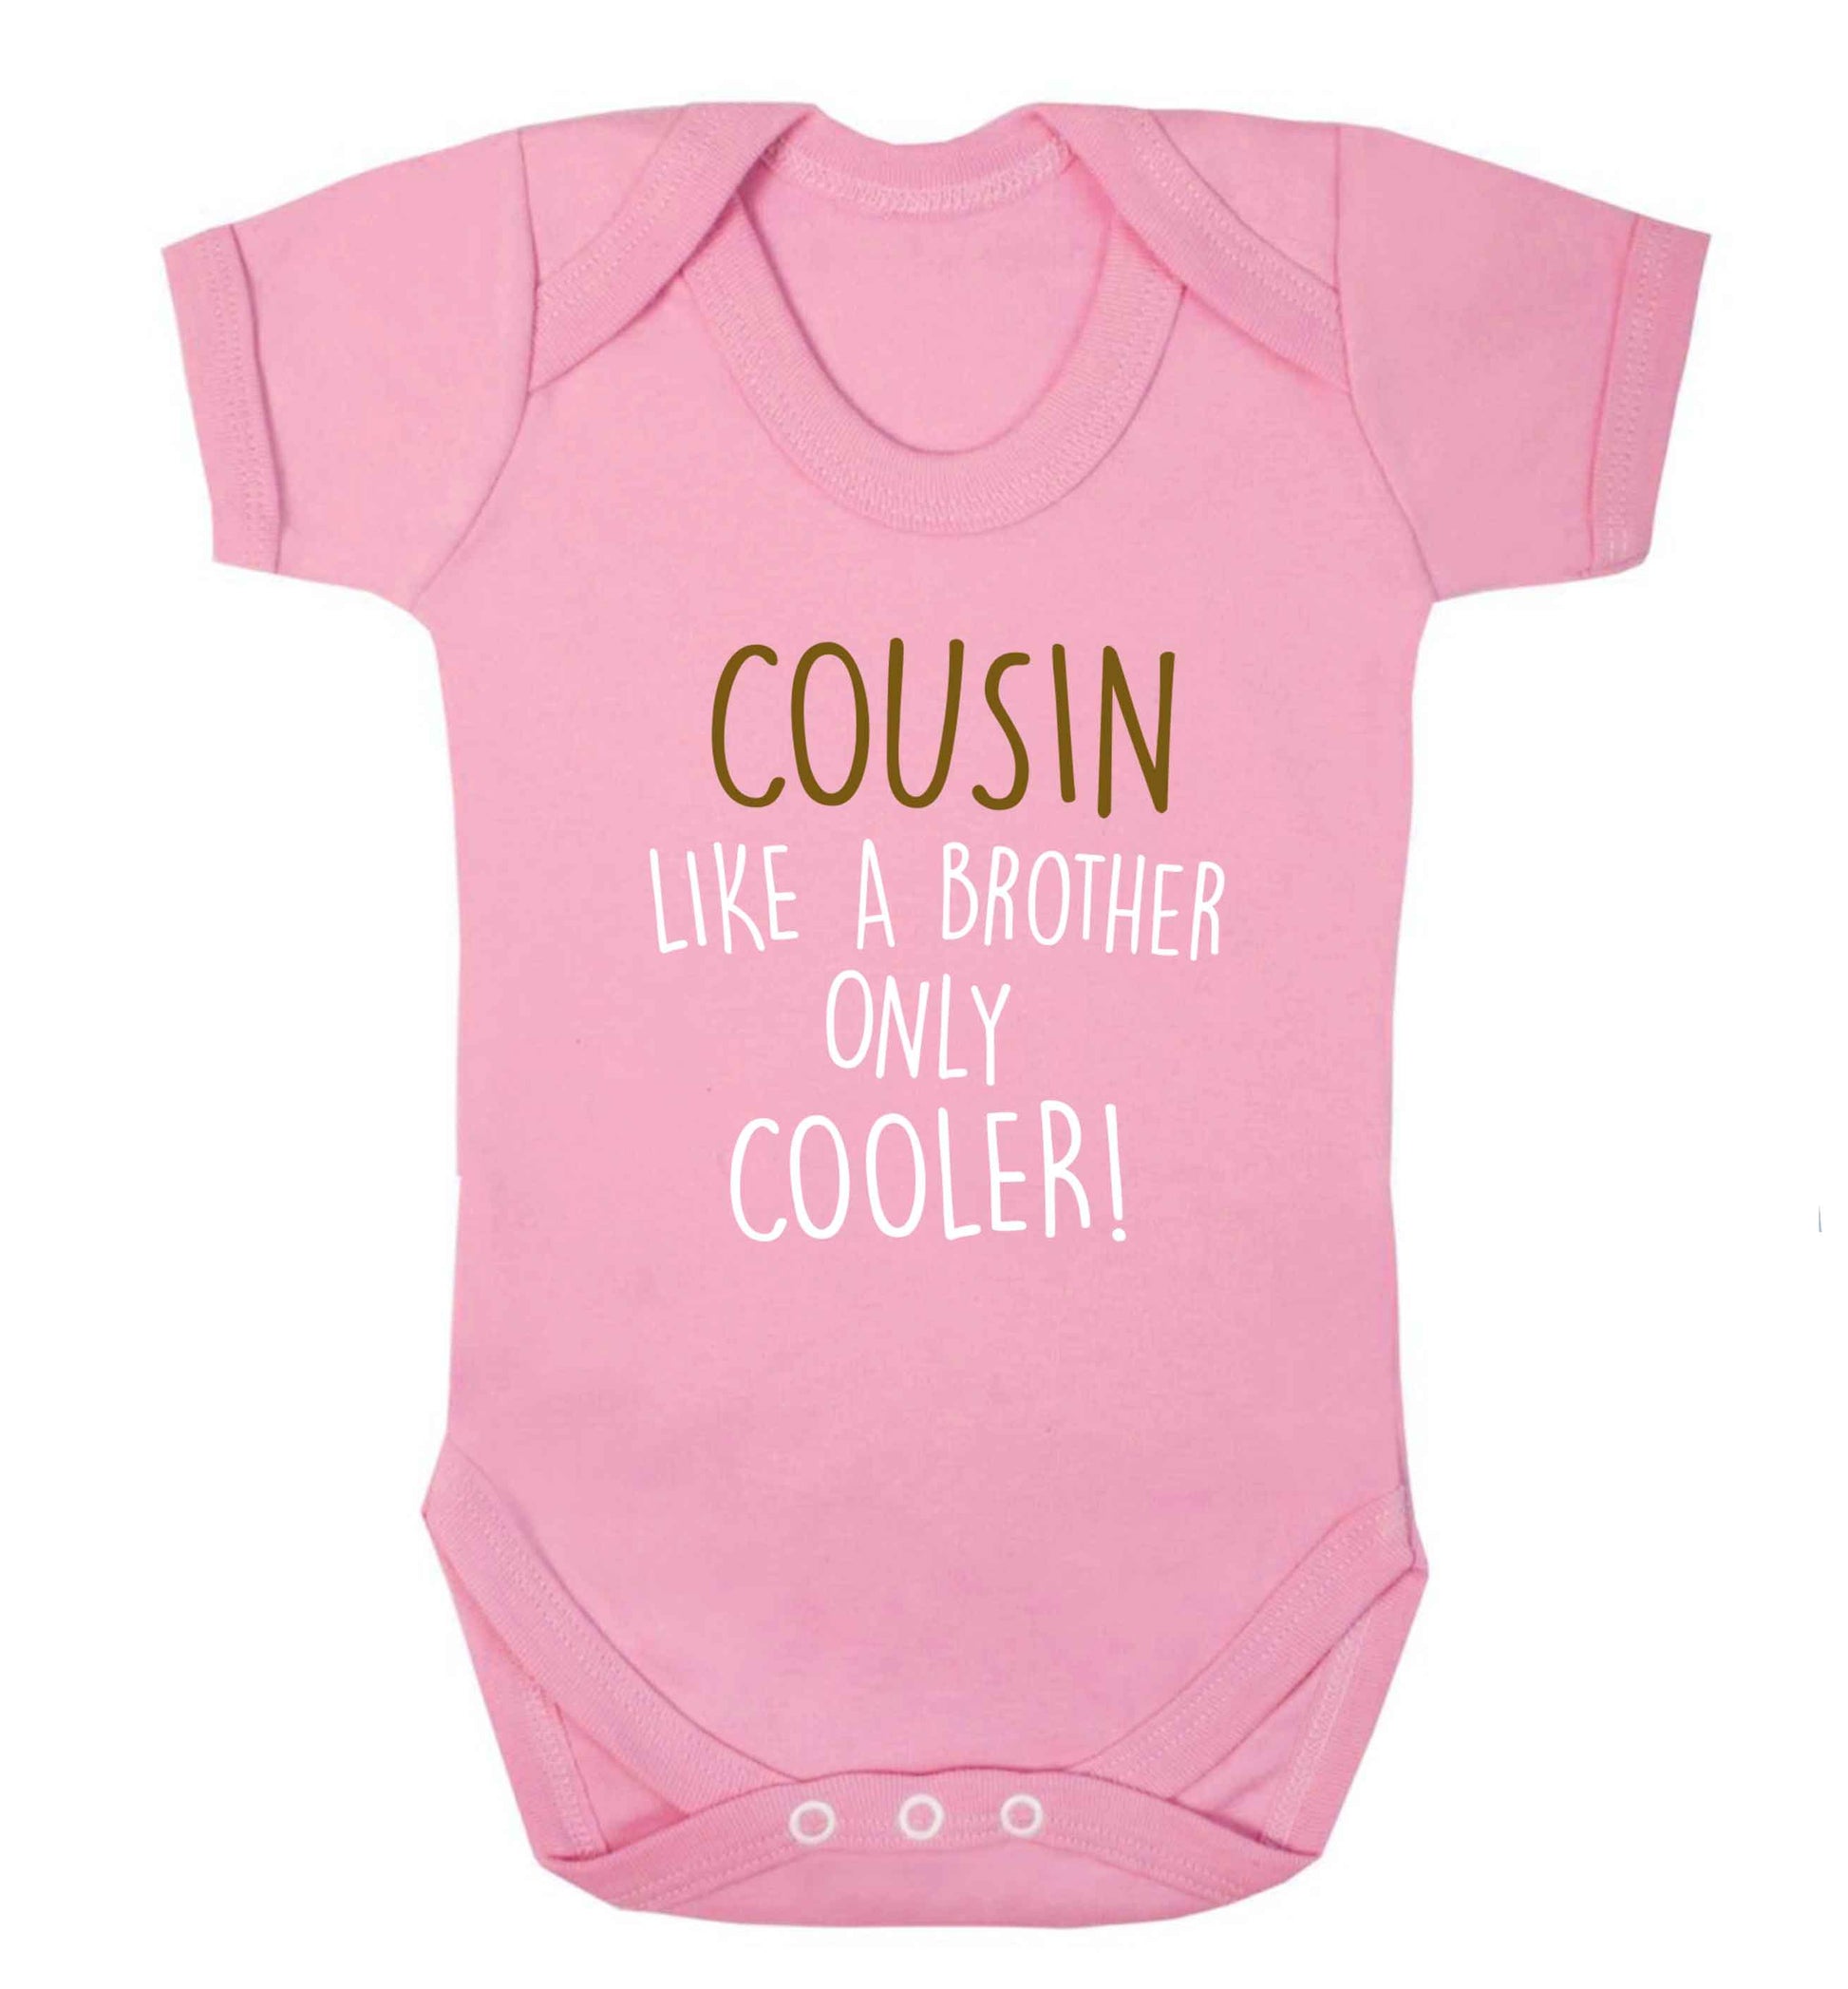 Cousin like a brother only cooler baby vest pale pink 18-24 months